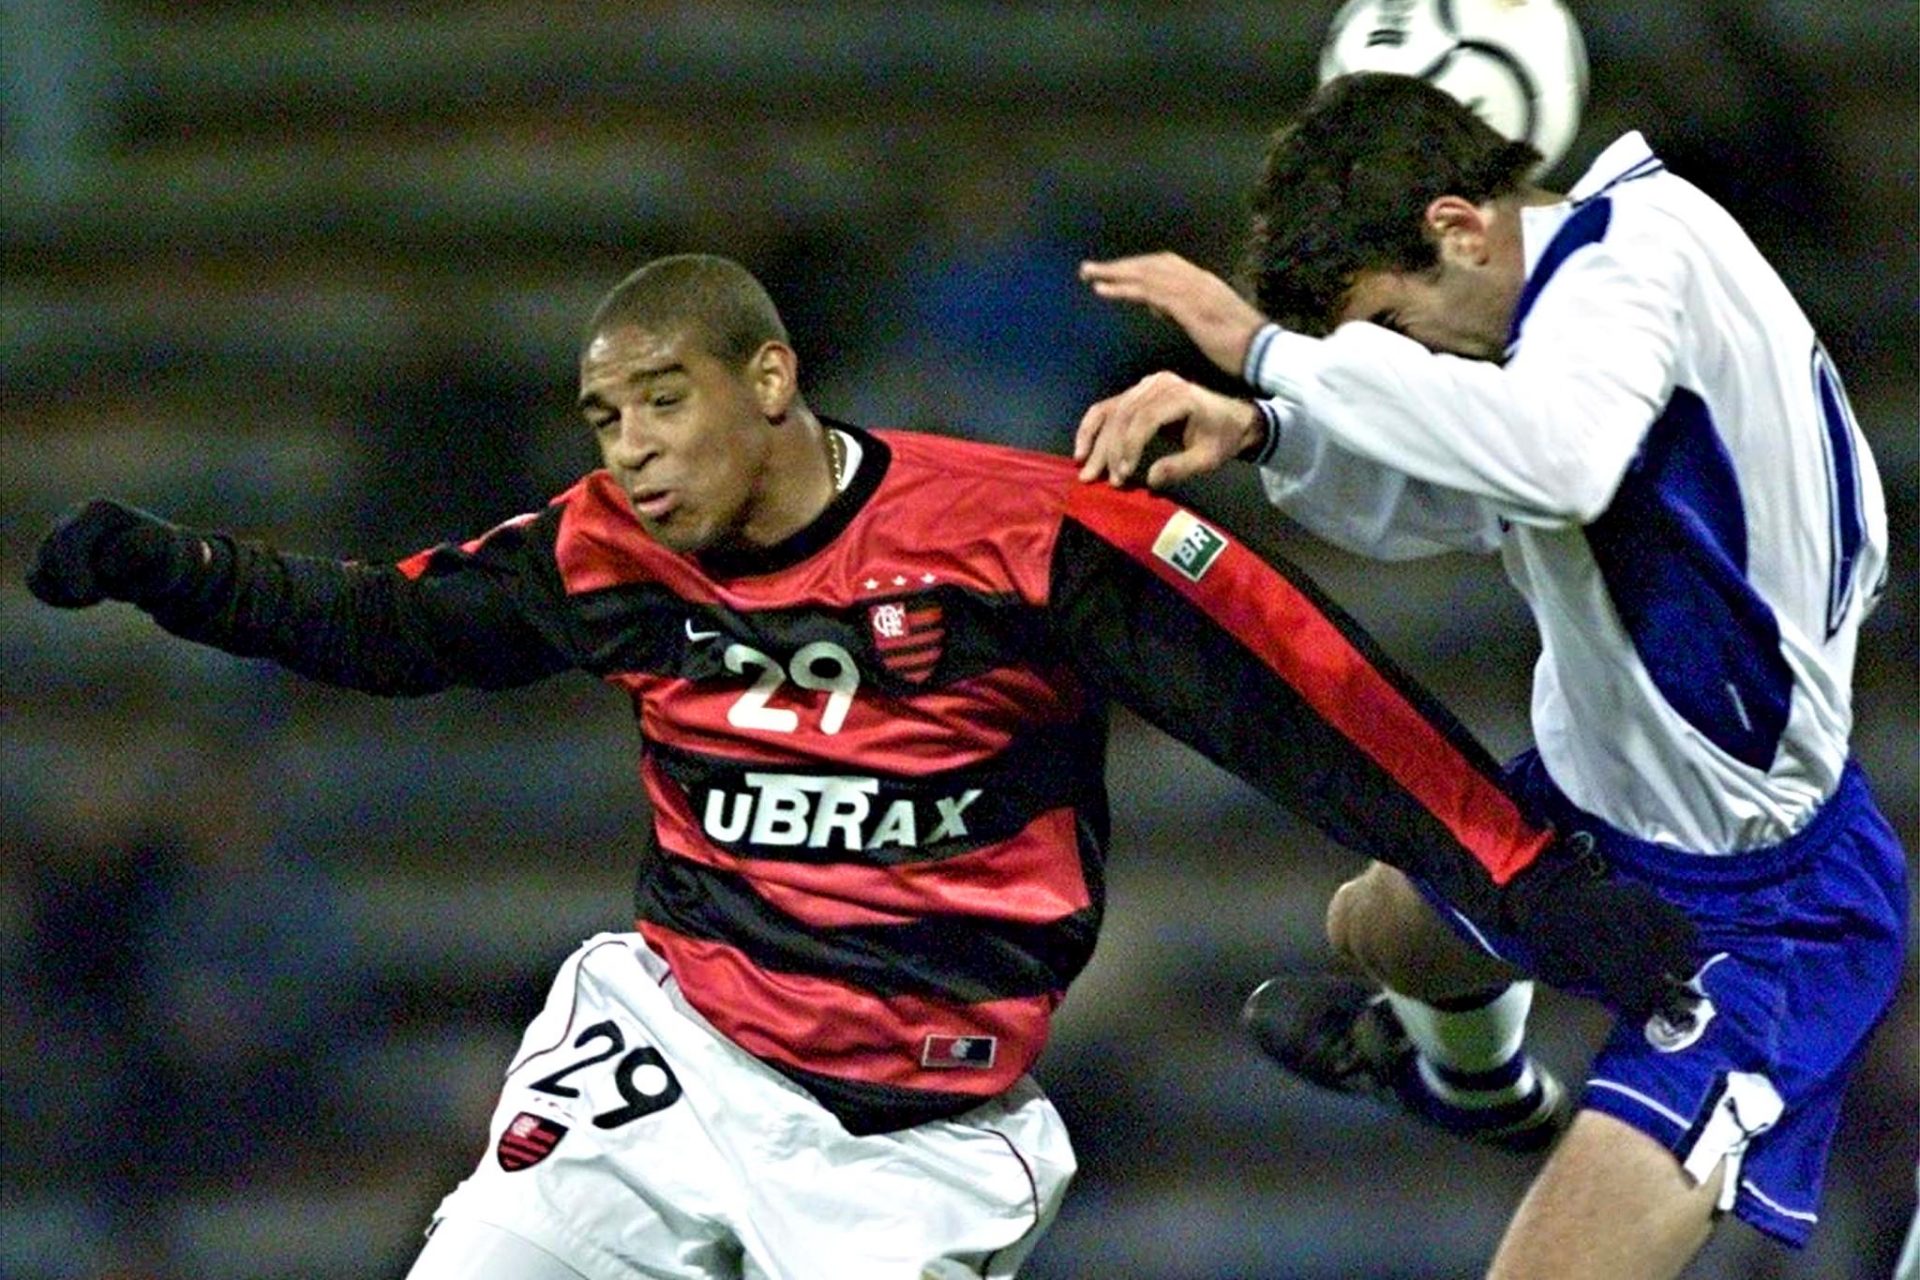 <p><span>His passion and talent caught the eye of recruiters from Flamengo, one of Brazil's biggest football clubs. At the age of 14, Adriano joined their youth academy and began to make a name for himself with his physical power, shooting technique and ability to score goals out of nowhere.</span></p>